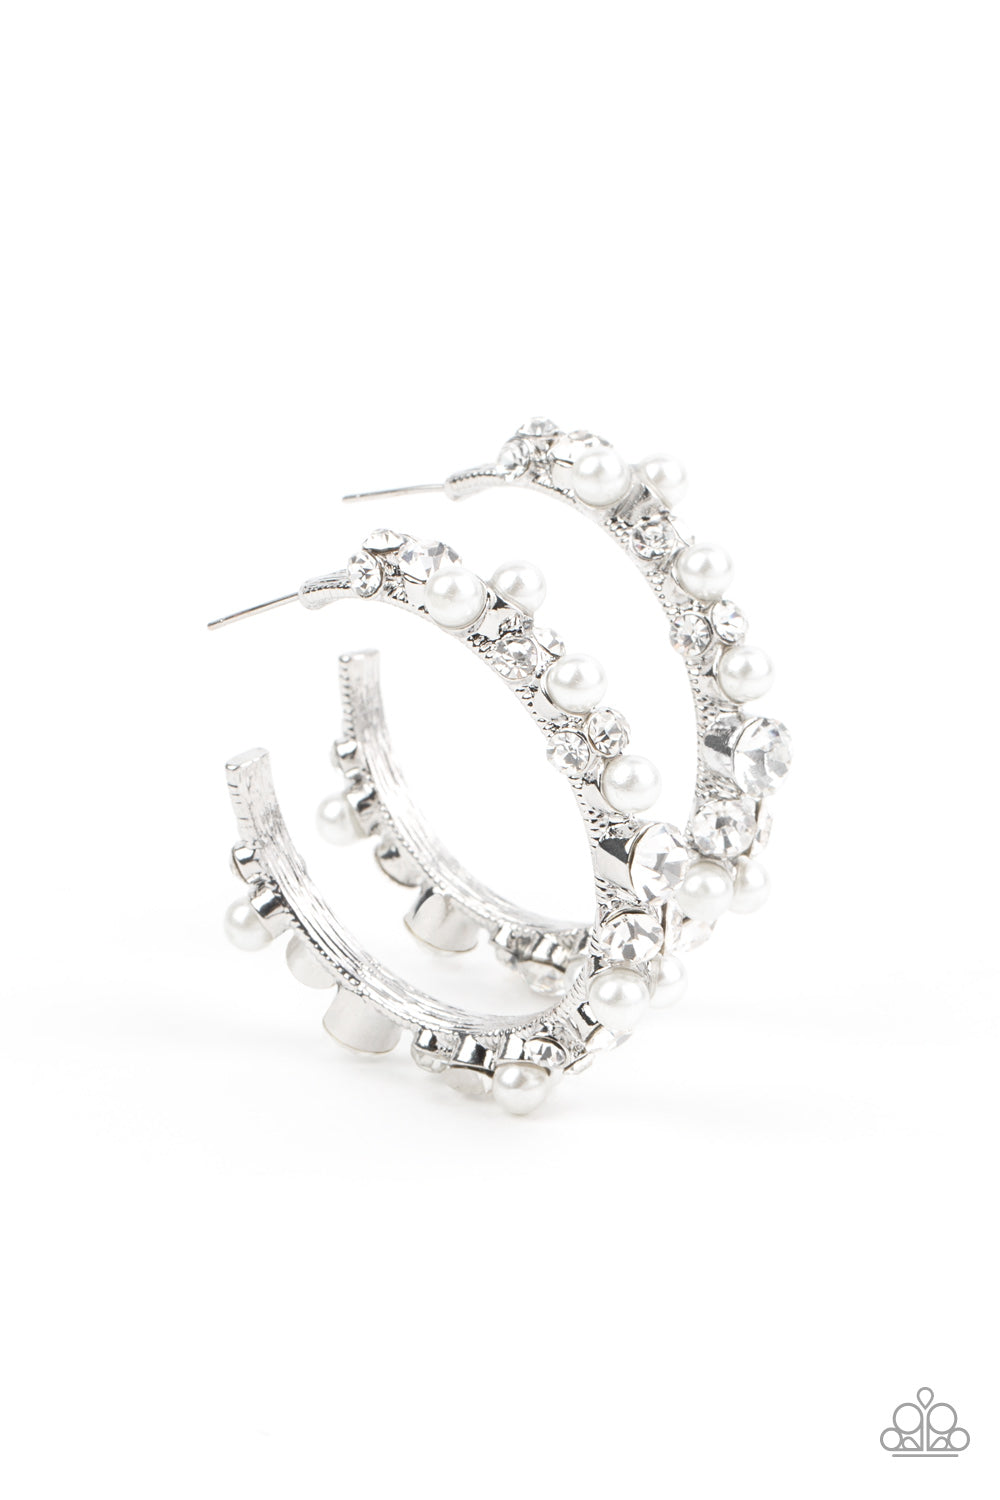 Let There Be SOCIALITE - White Earrings - Paparazzi Accessories 